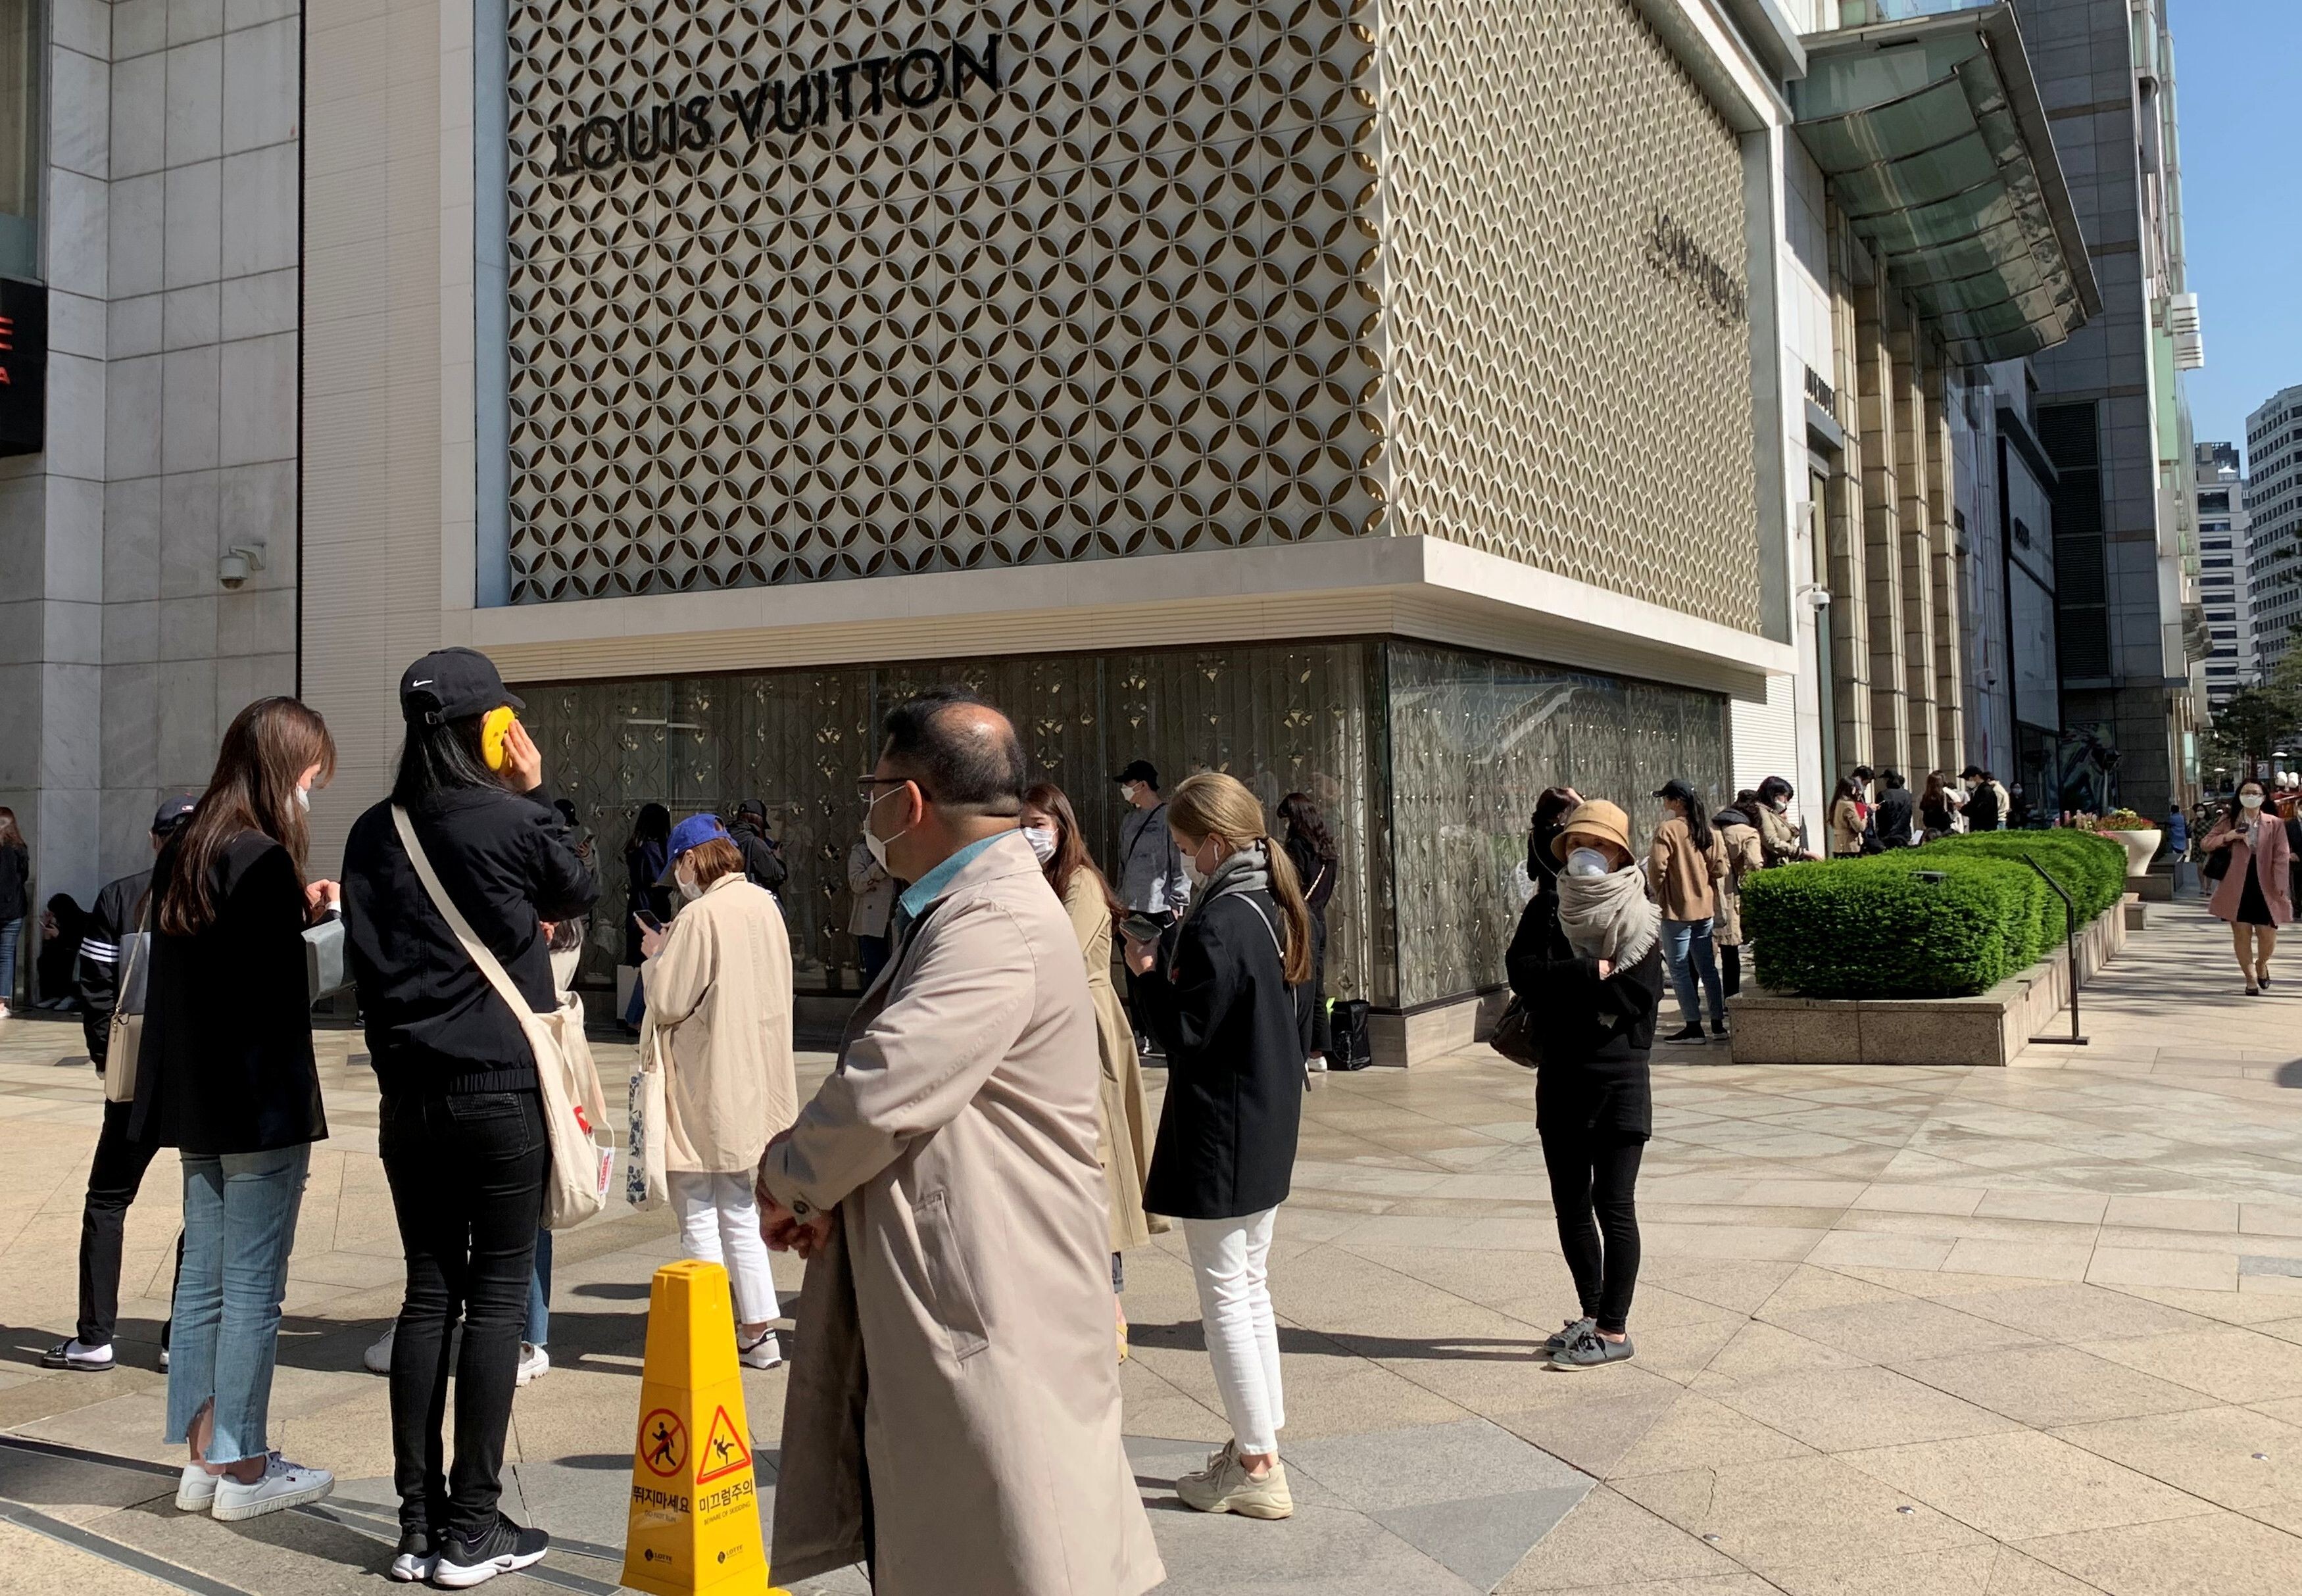 Queue of shoppers outside Louis Vuitton store on Champs Elysees in